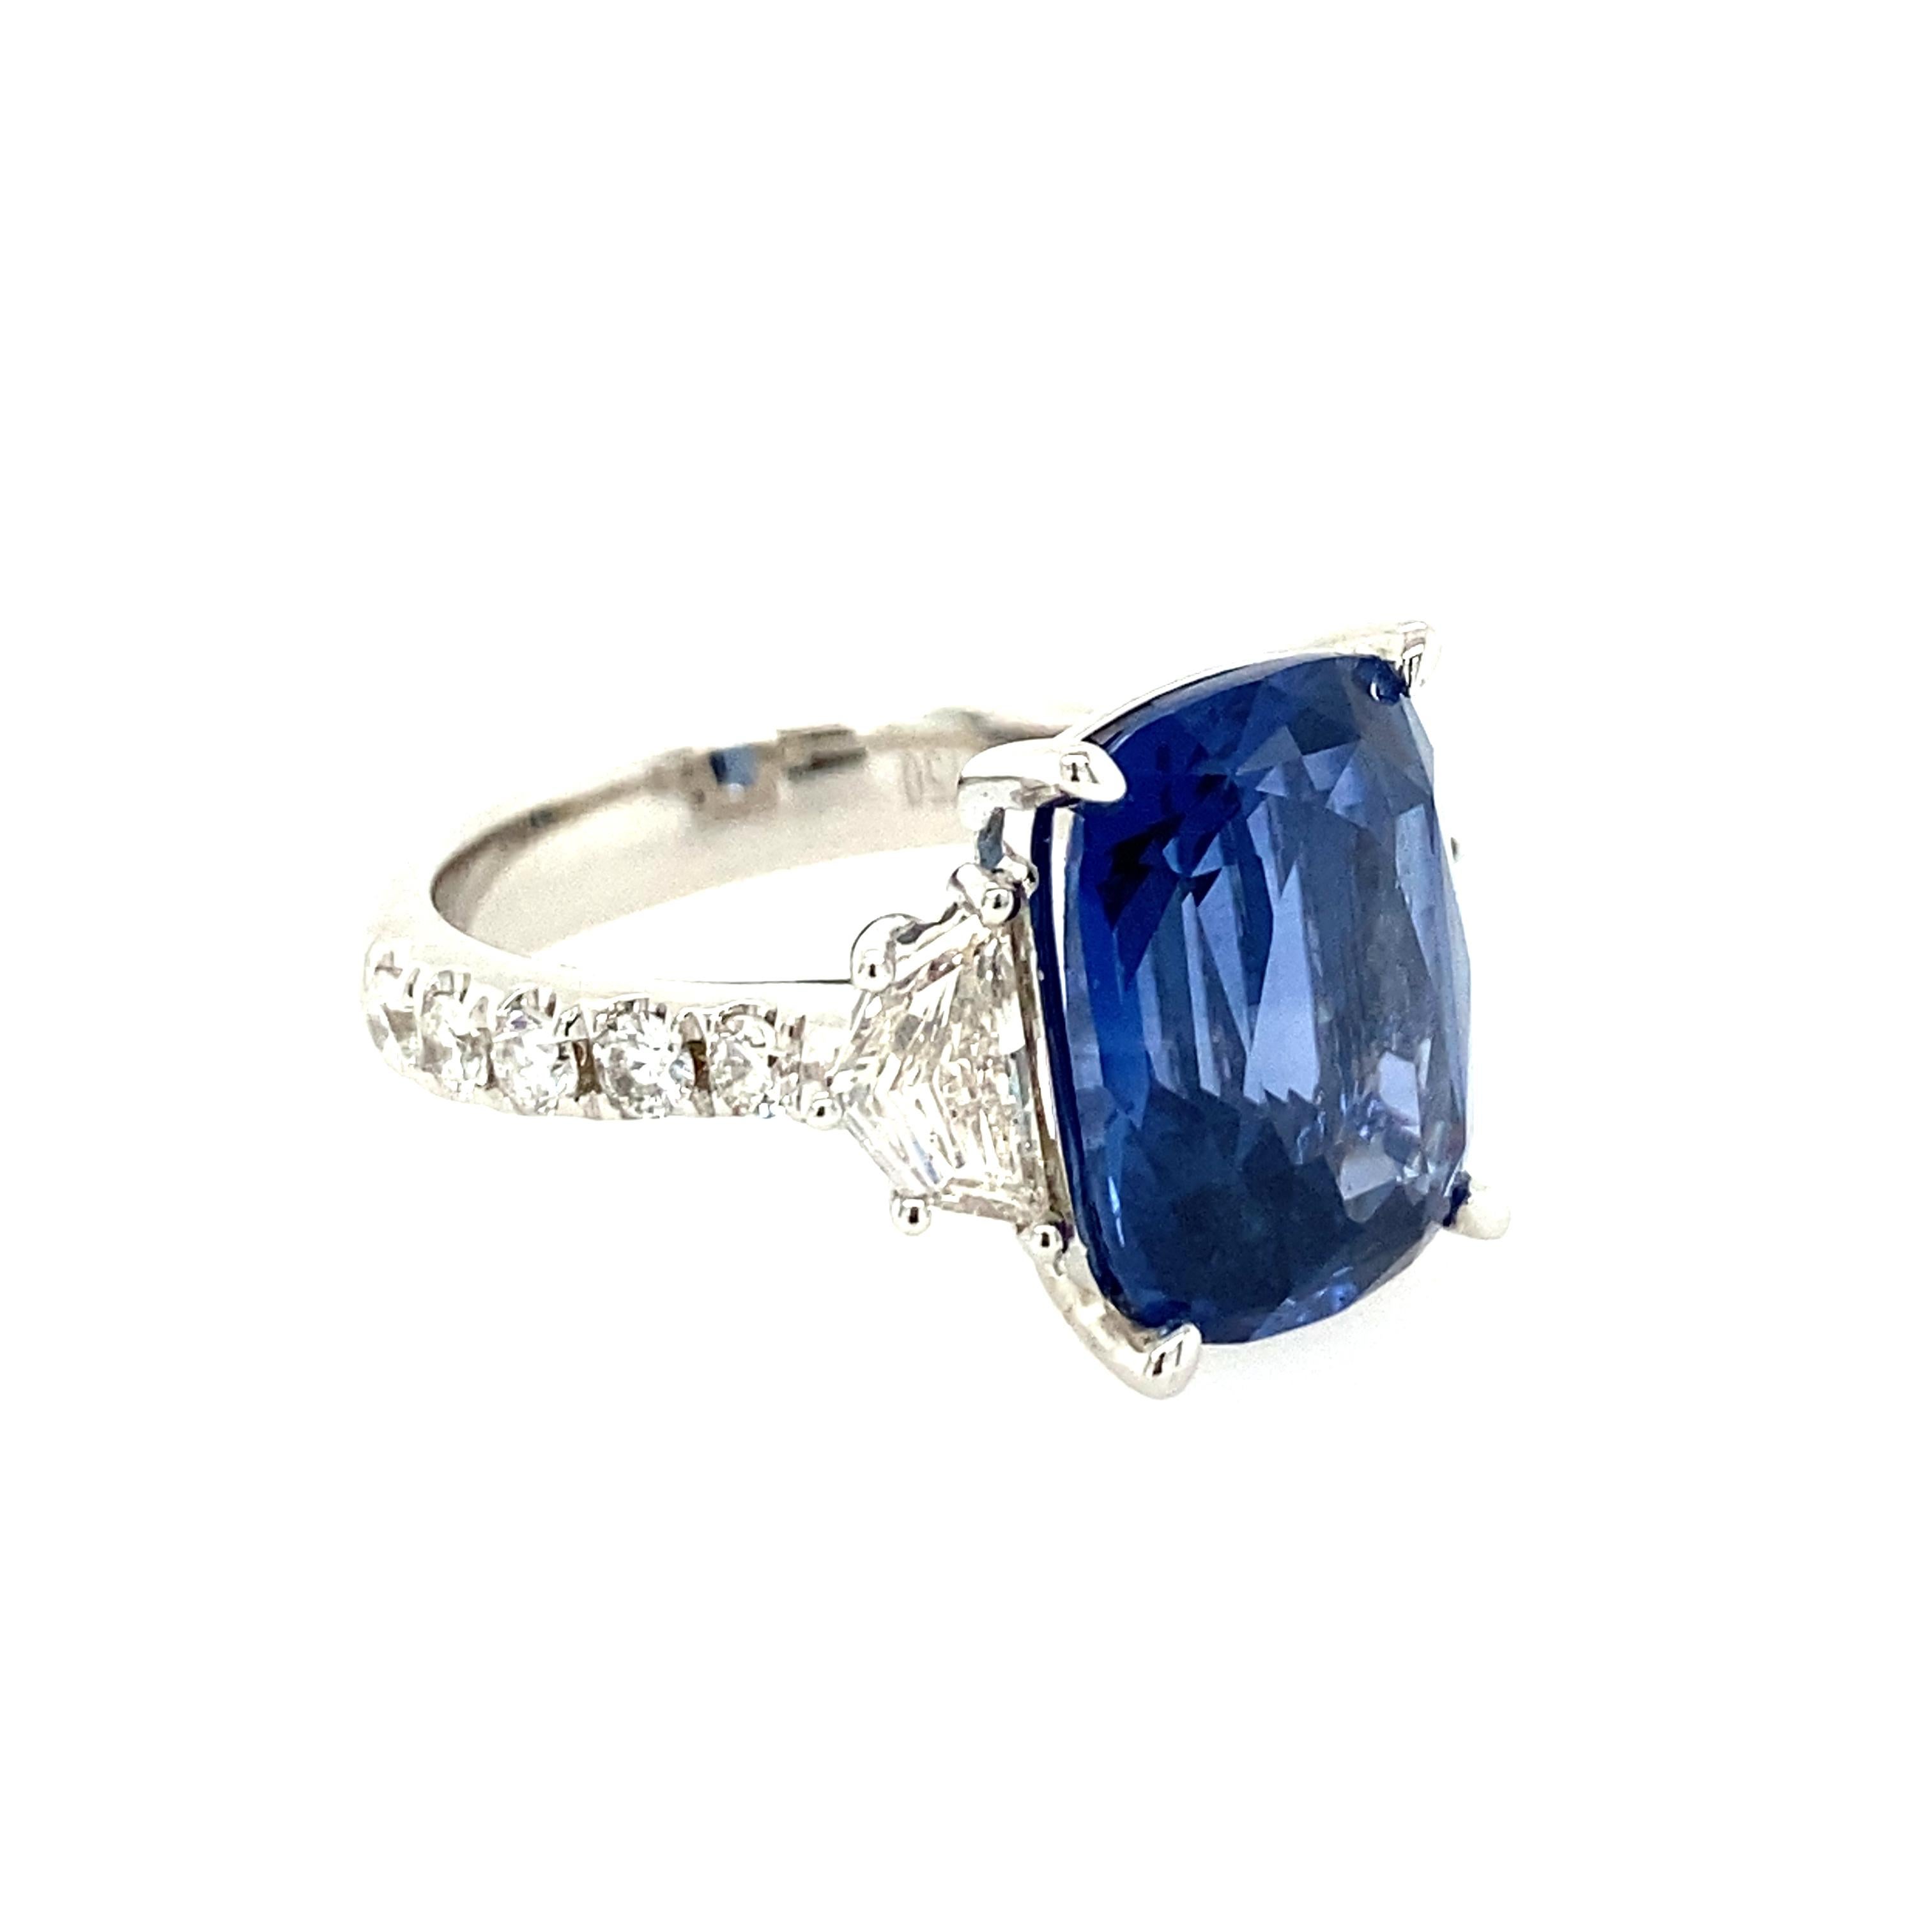 Contemporary Blue Sapphire and Diamond Ring in 18K White Gold